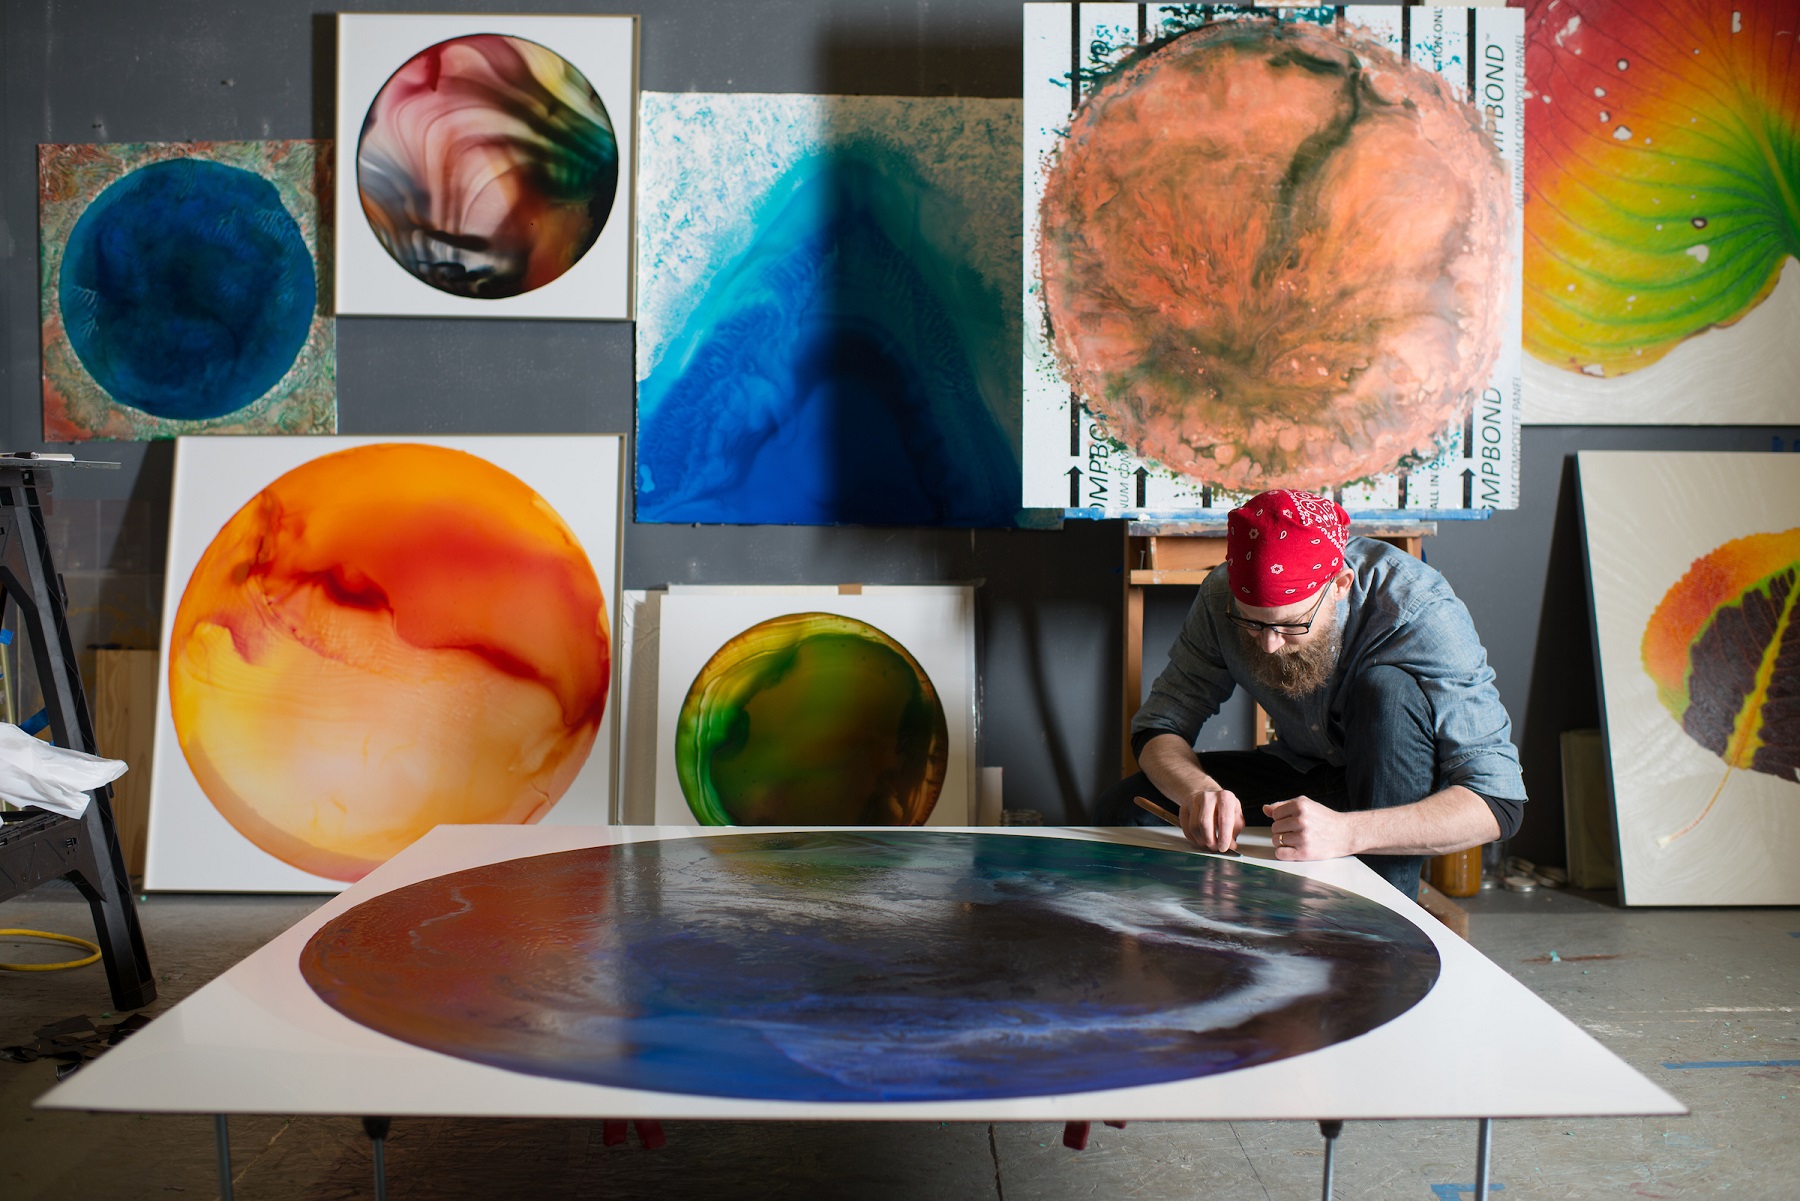 John Sabraw is shown working with artwork in his studio